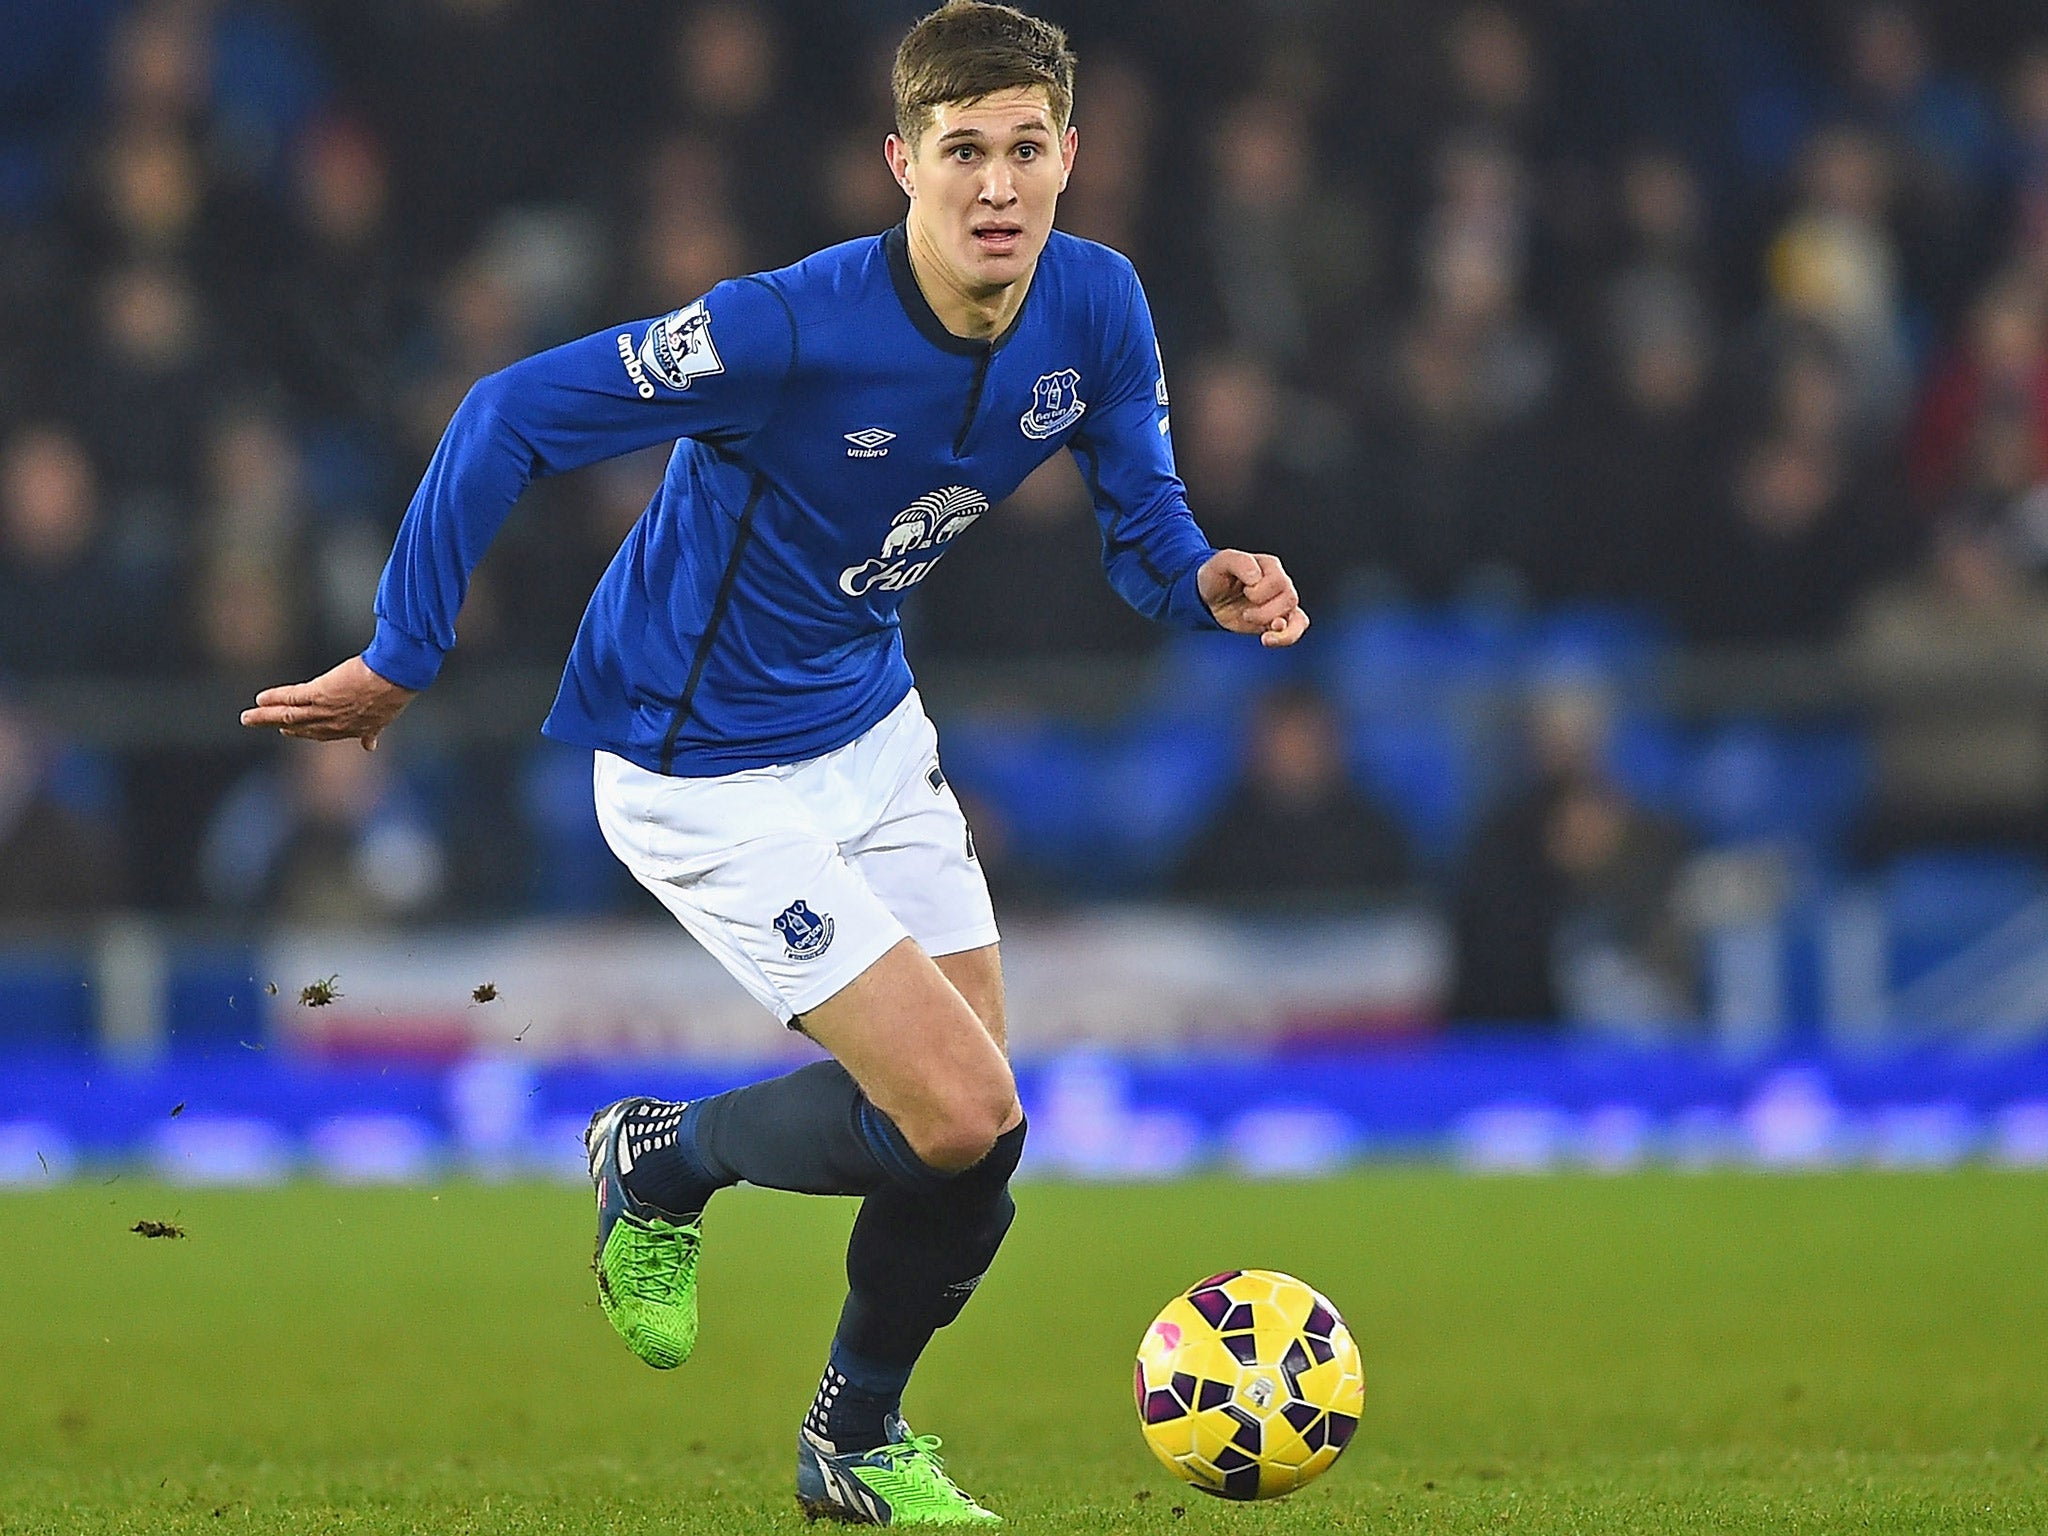 The Chelsea manager sees John Stones, pictured, as a long-term replacement for captain John Terry